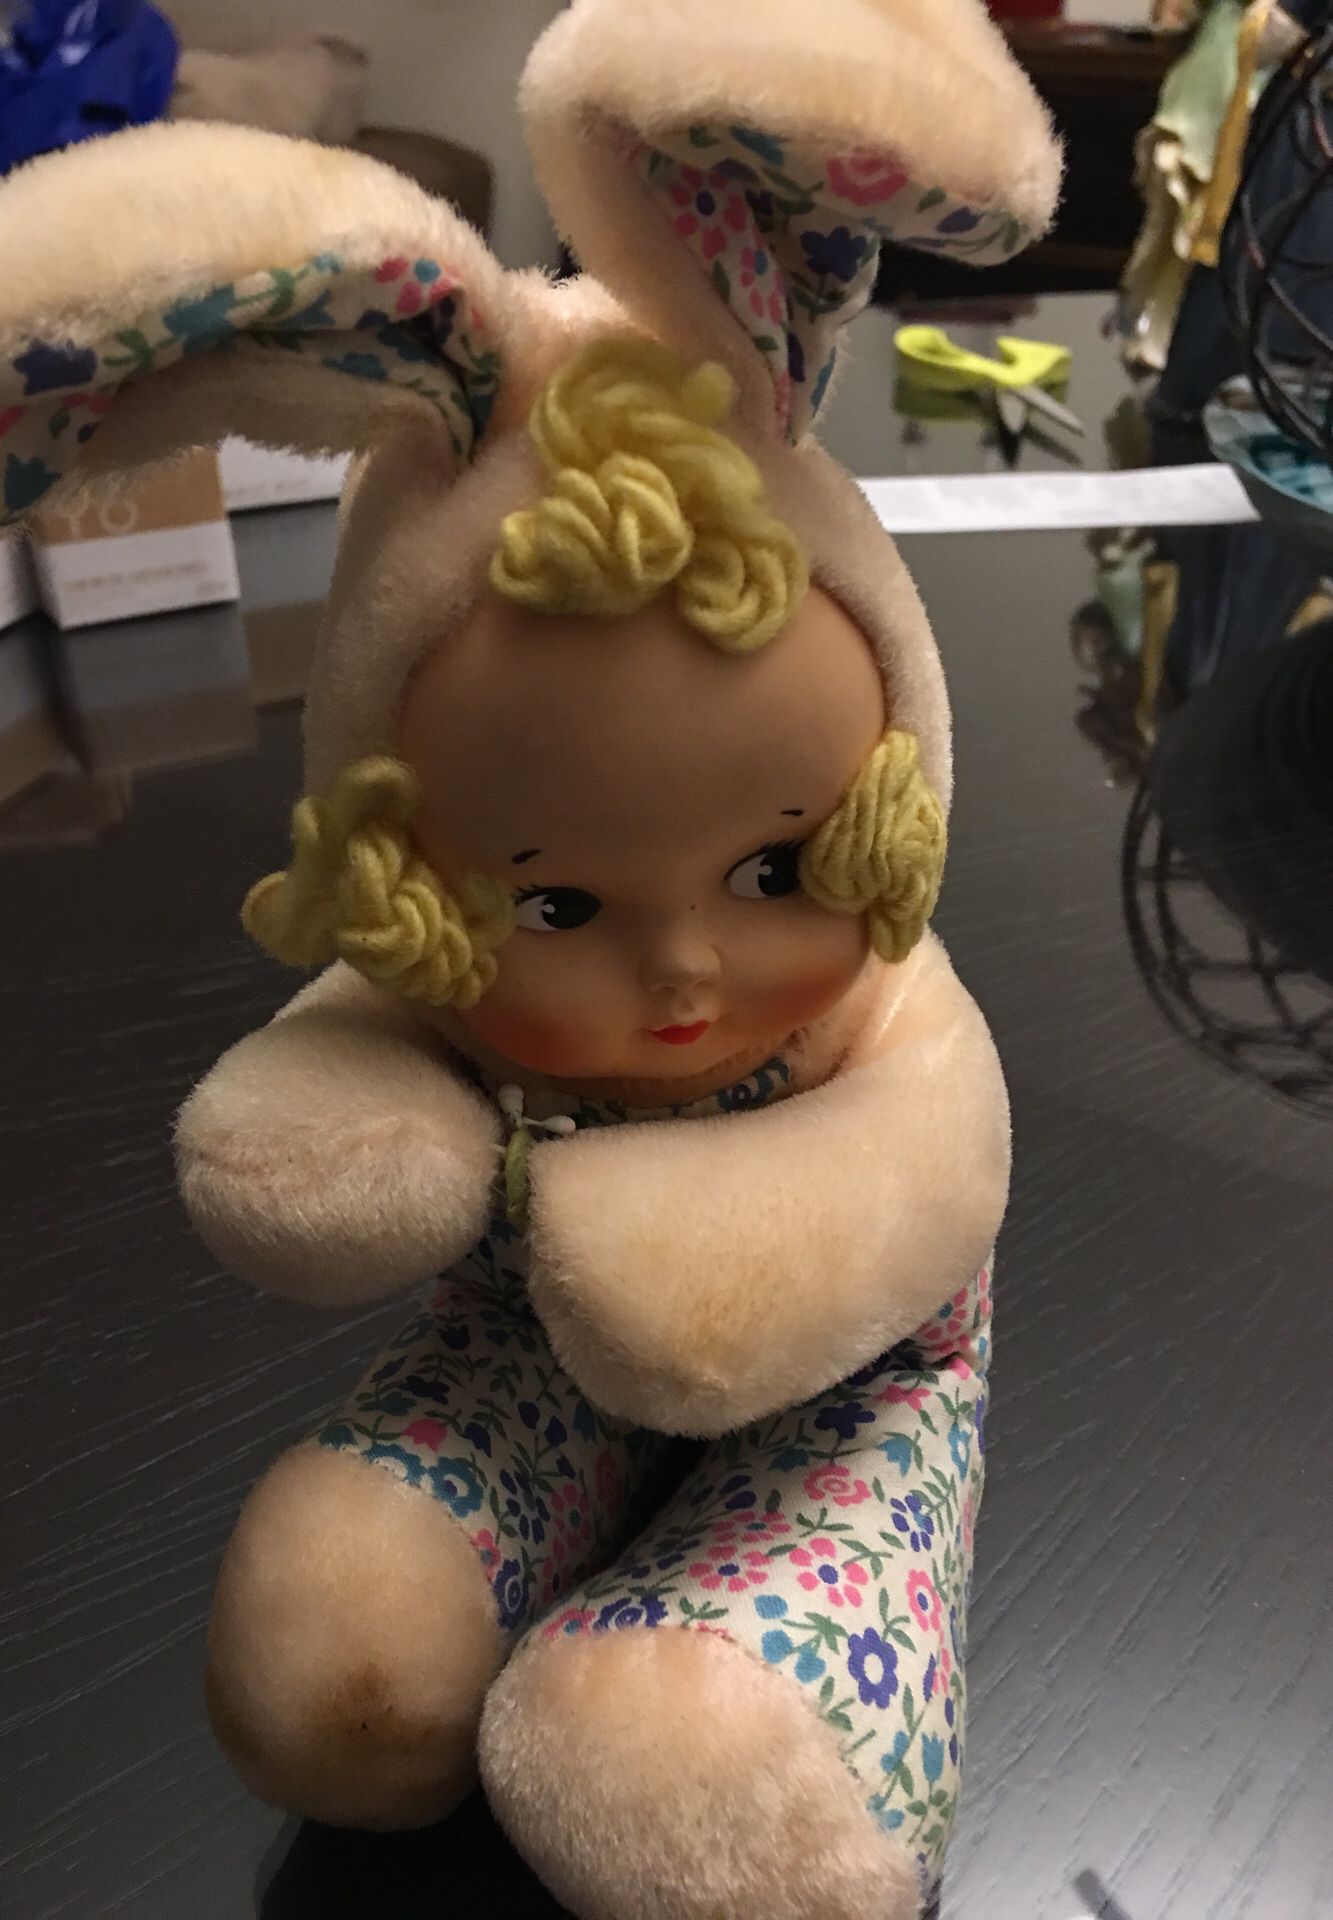 Antique Doll about 6 inches high. No markings